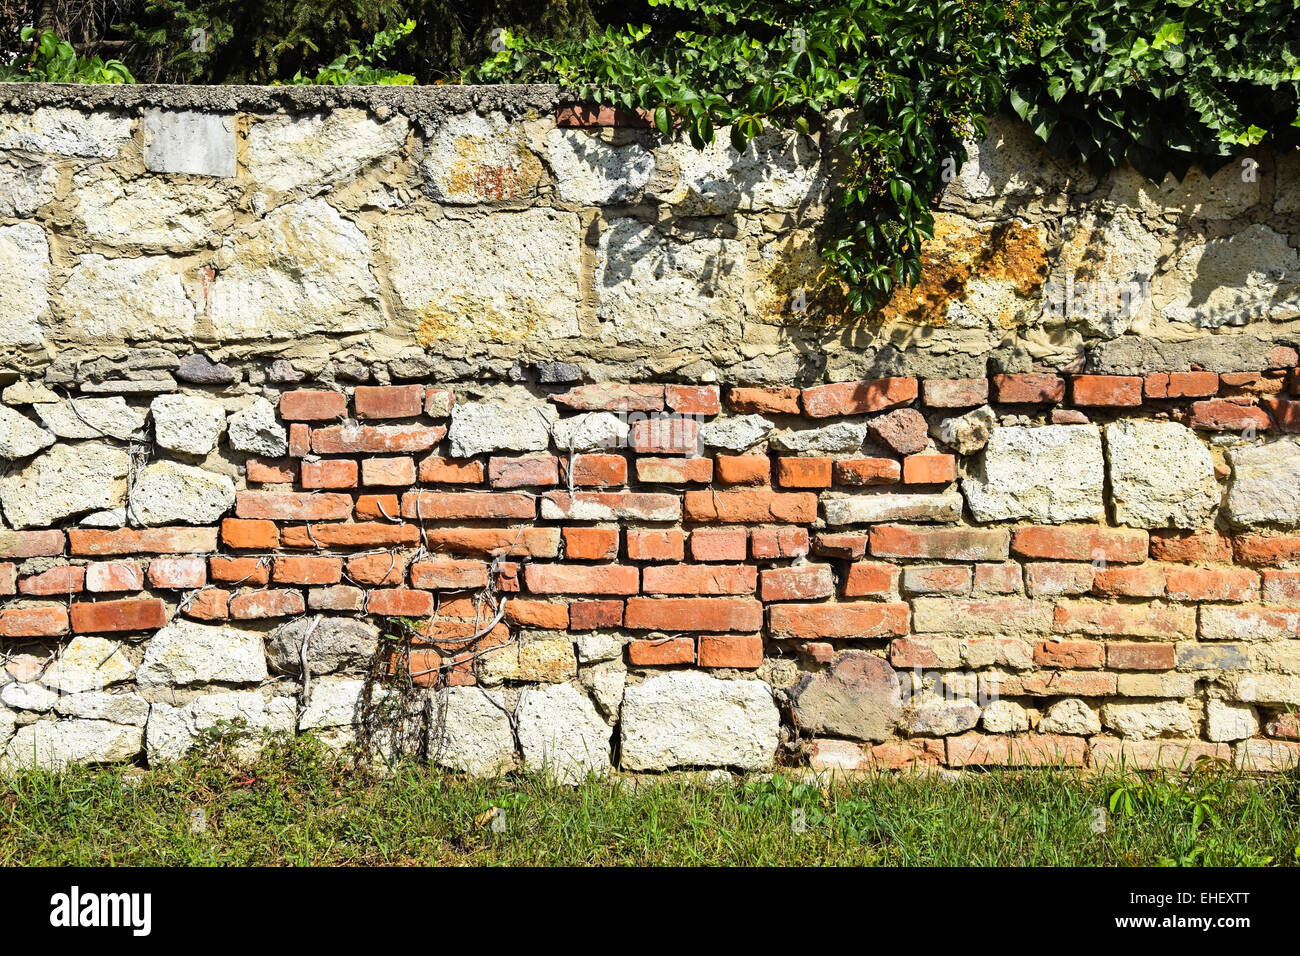 Old stone and brick wall Stock Photo